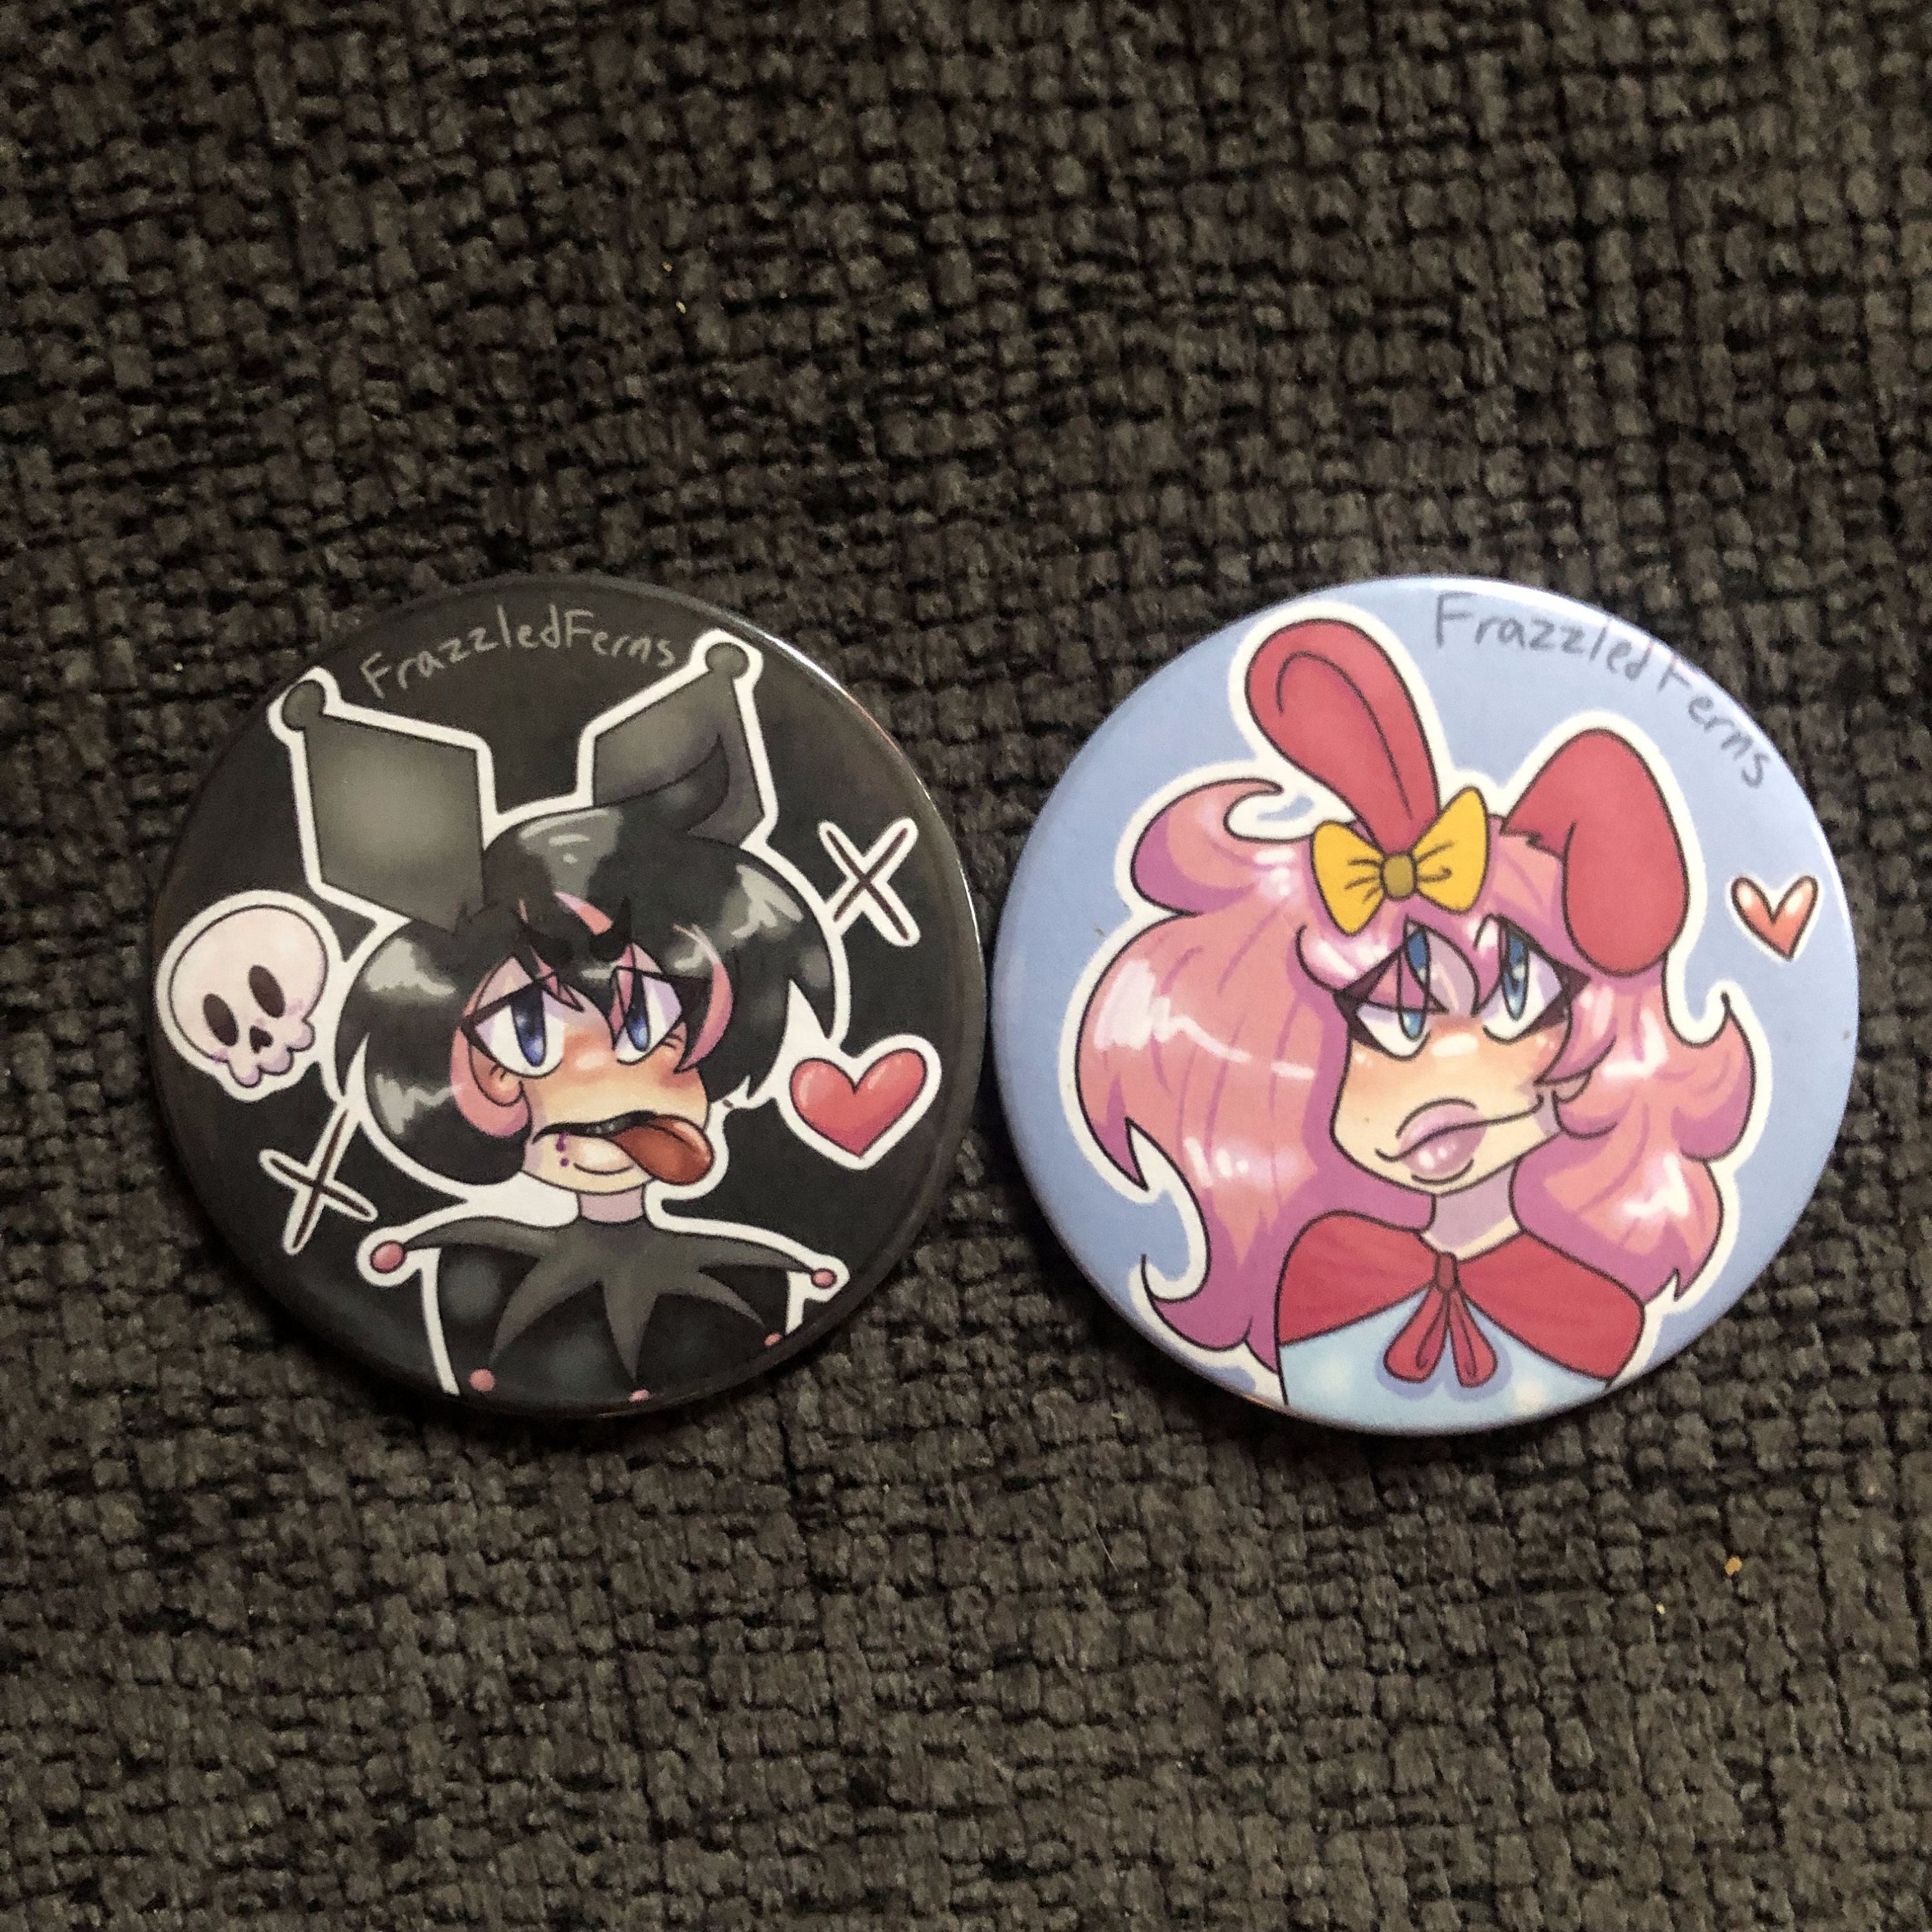 matching my melody and kuromi pins✨️ : r/polymerclay